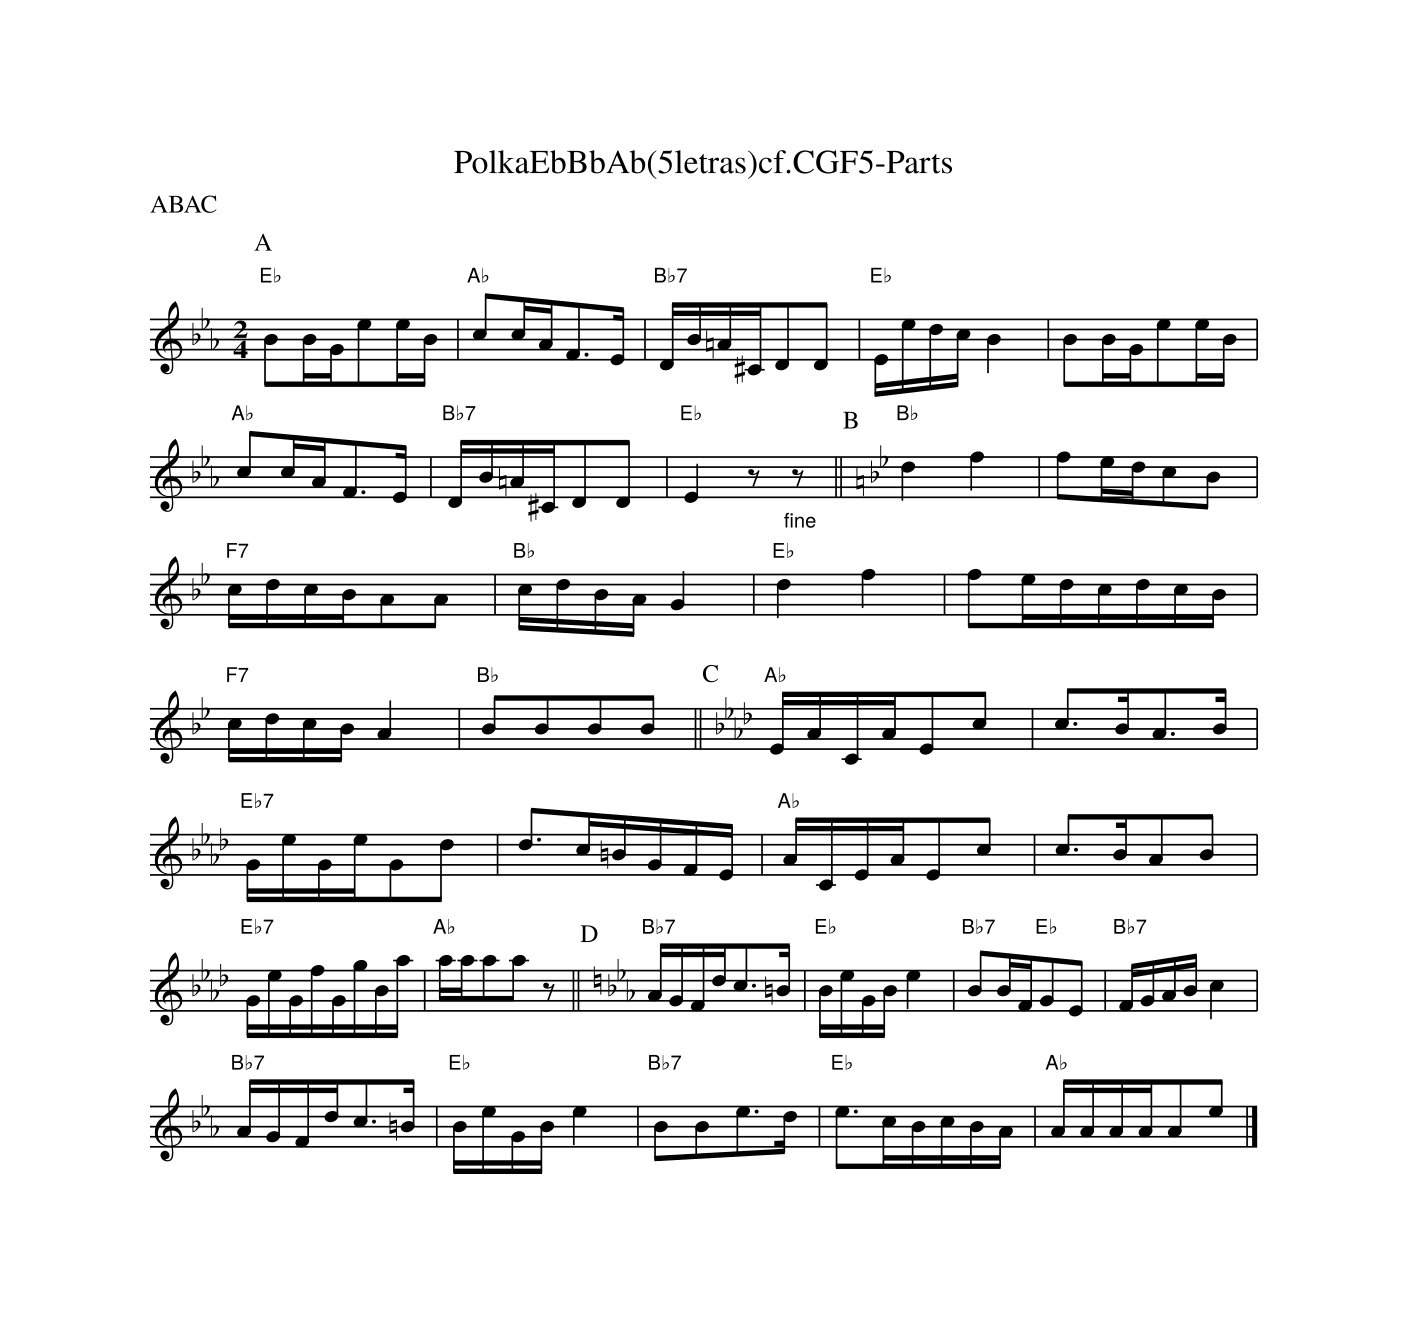 Score for “PolkaEbBbAb(5letras)cf.CGF5-Parts” (an ABC music sample generated by GPT-2-117M trained on a combined ABC dataset)